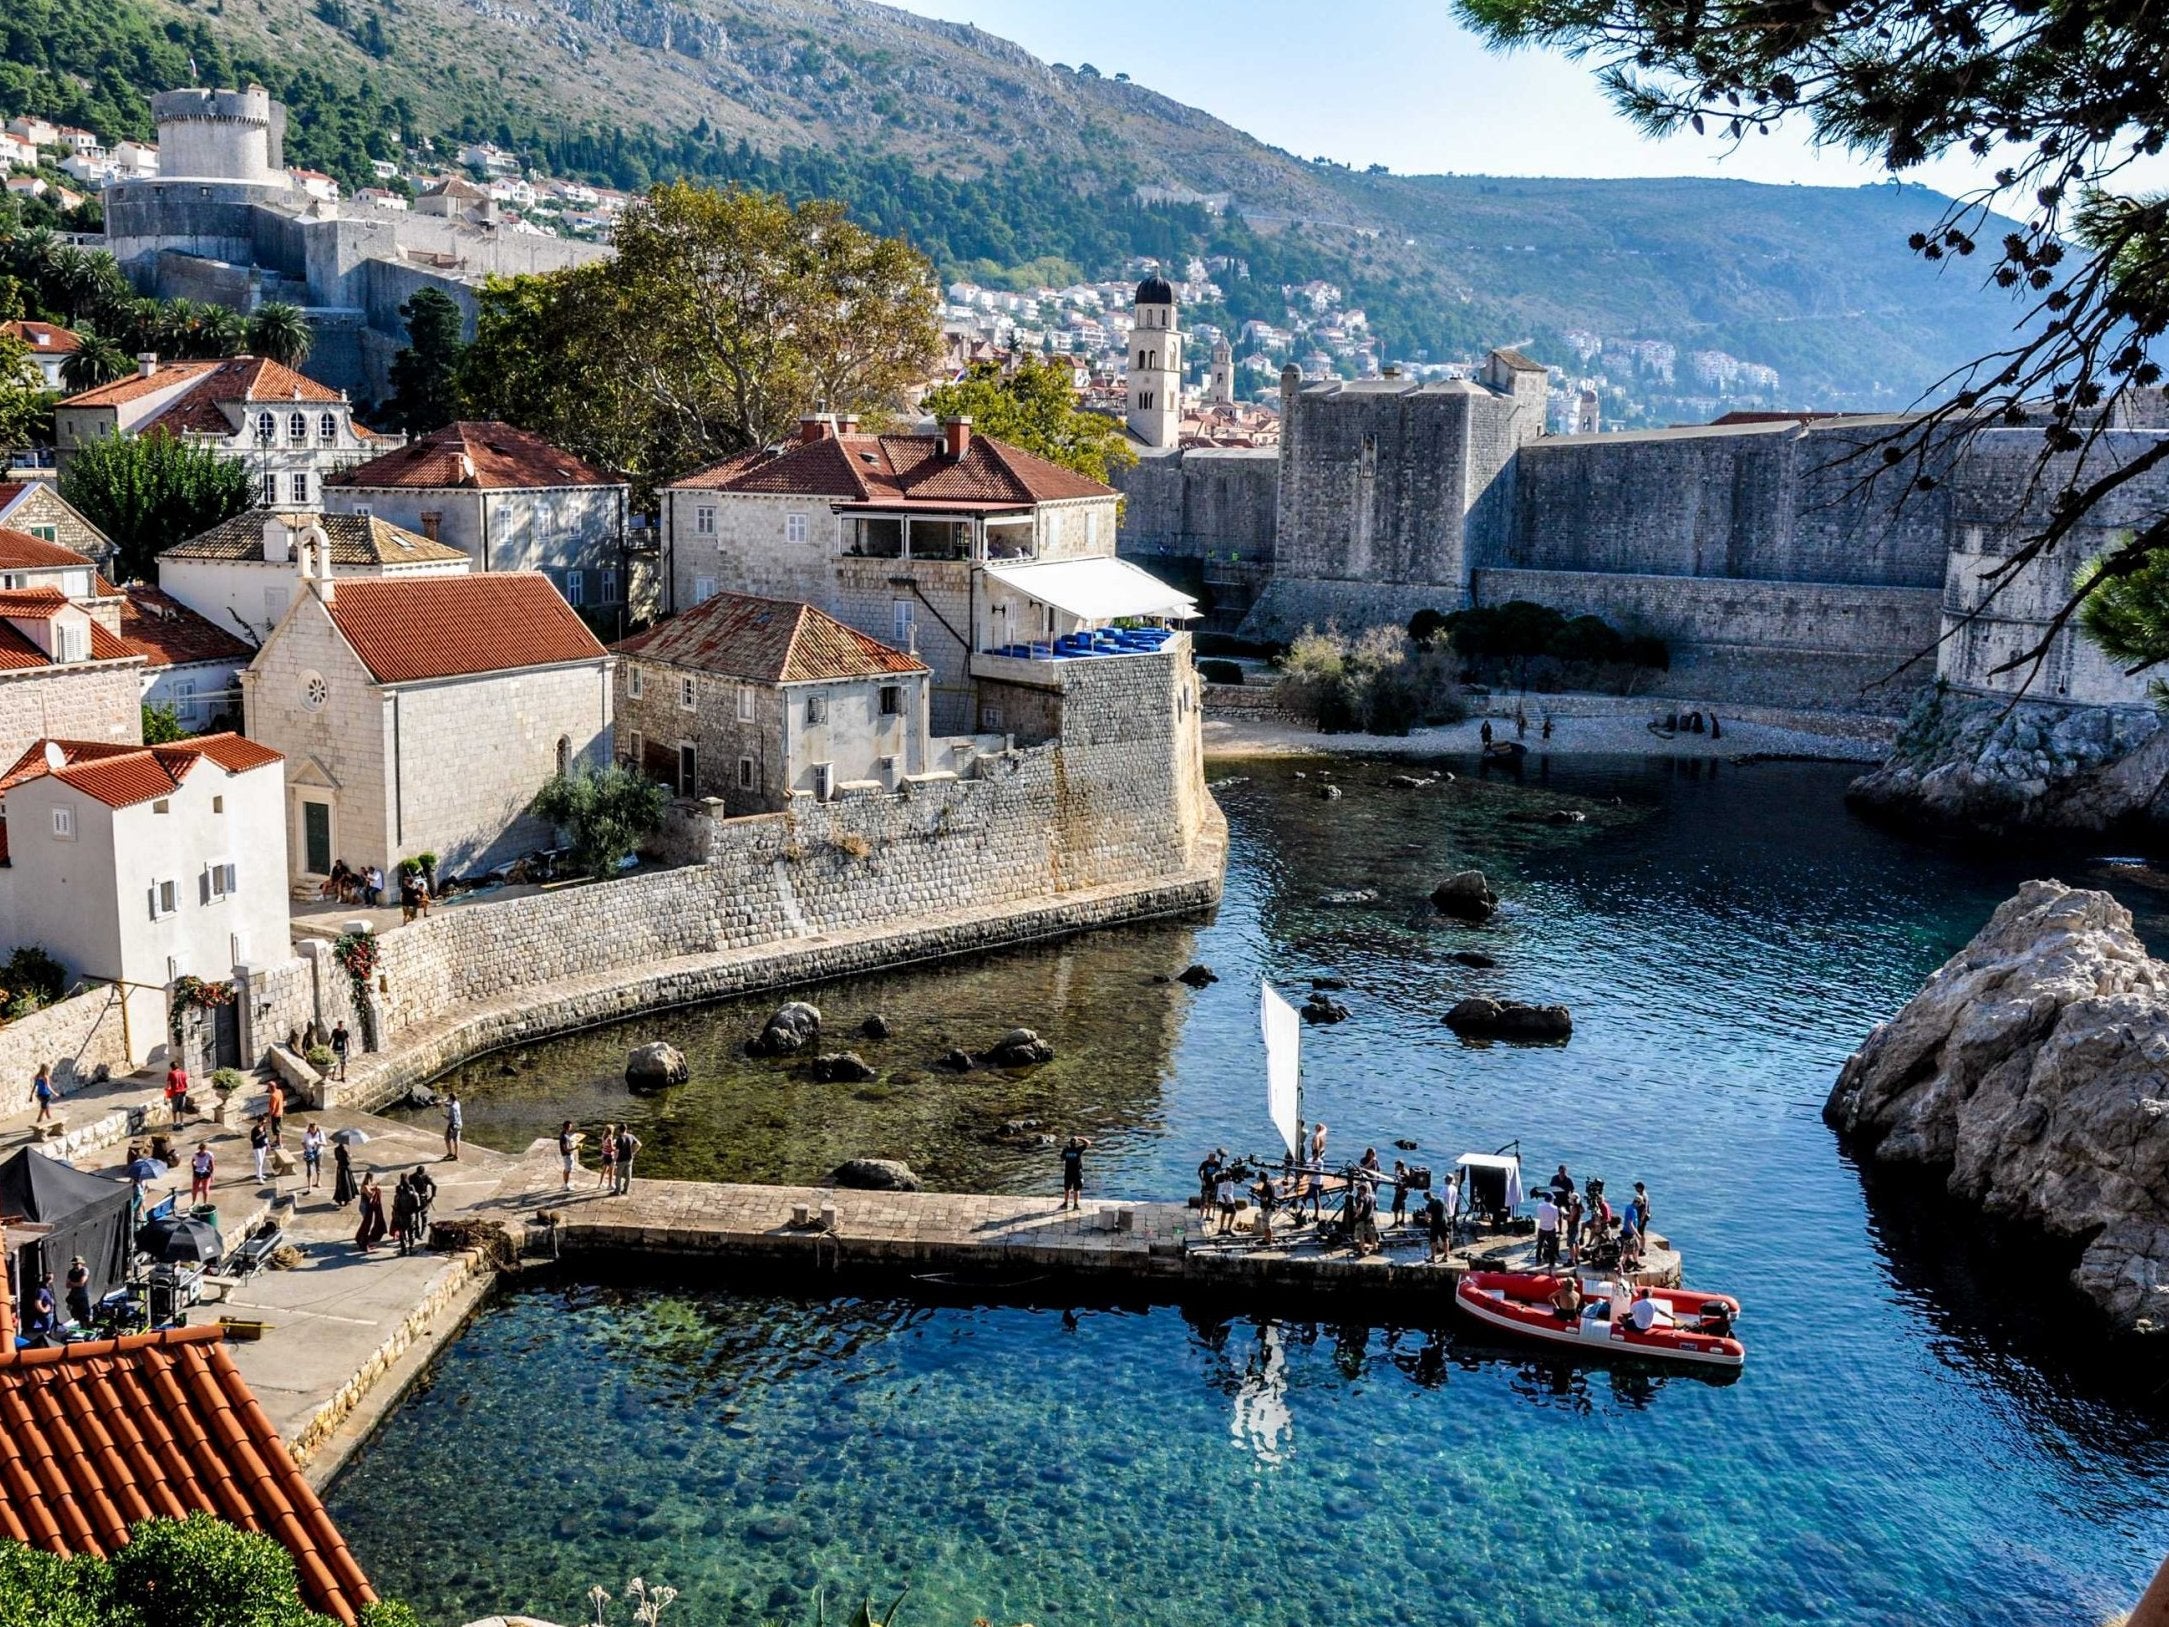 Dubrovnik on set: TV series ‘Game of Thrones’ was set in the Pile area near the city walls (Rex)